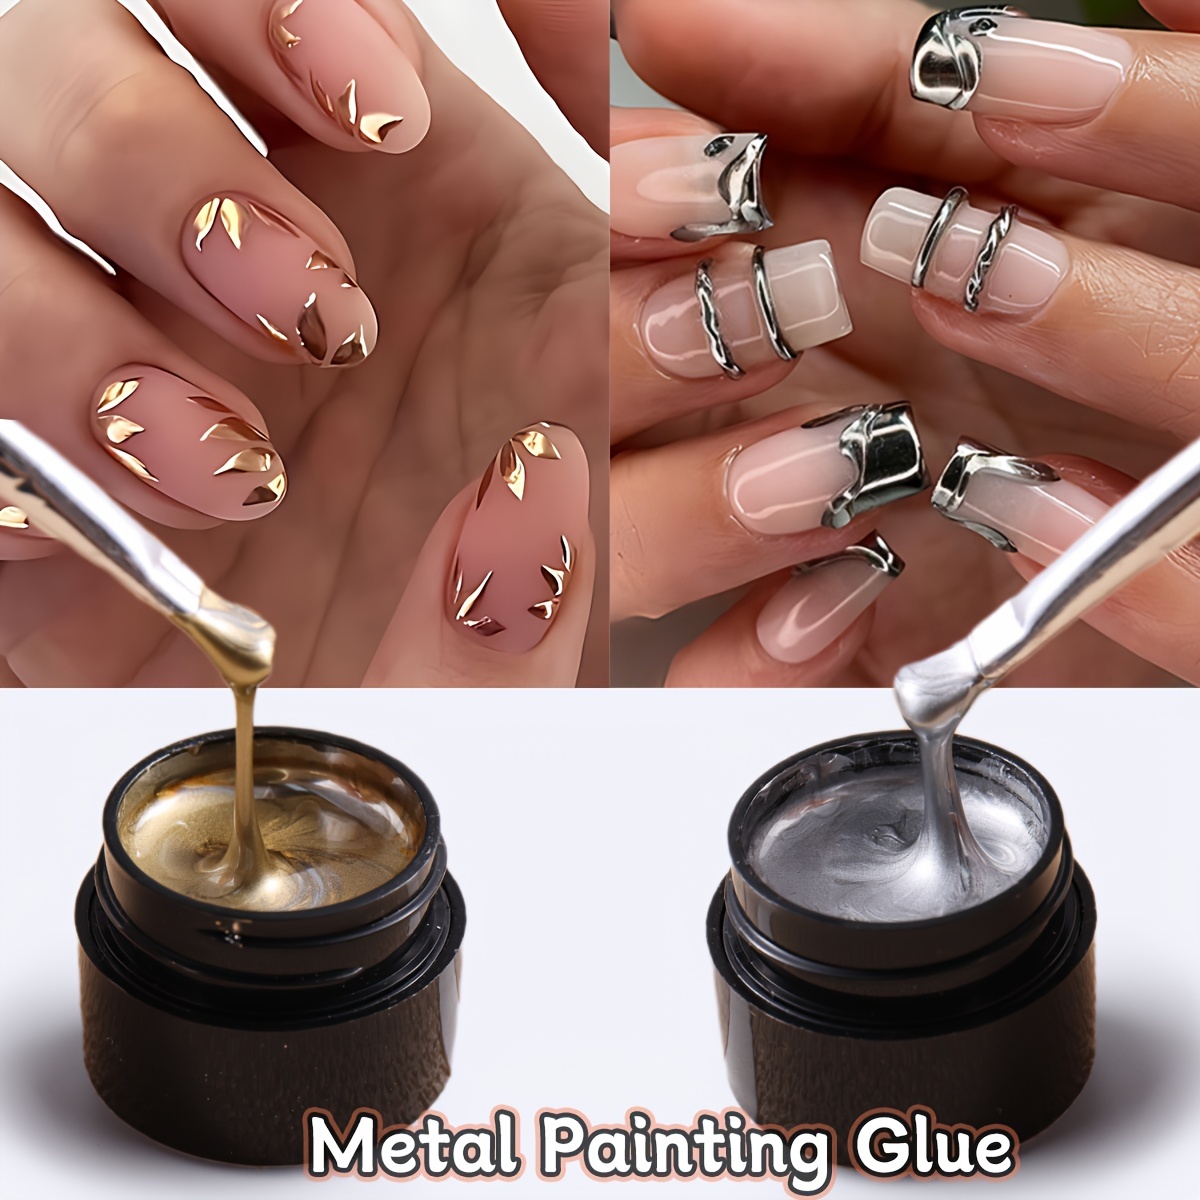 

Full Beauty 5ml Metallic Chrome 3d Painting Gel Polish - Gold, Silver, Rose Gold Mirror Metal Gel, Uv/led Nail Art, Unscented, Sulfate-free Gel Form